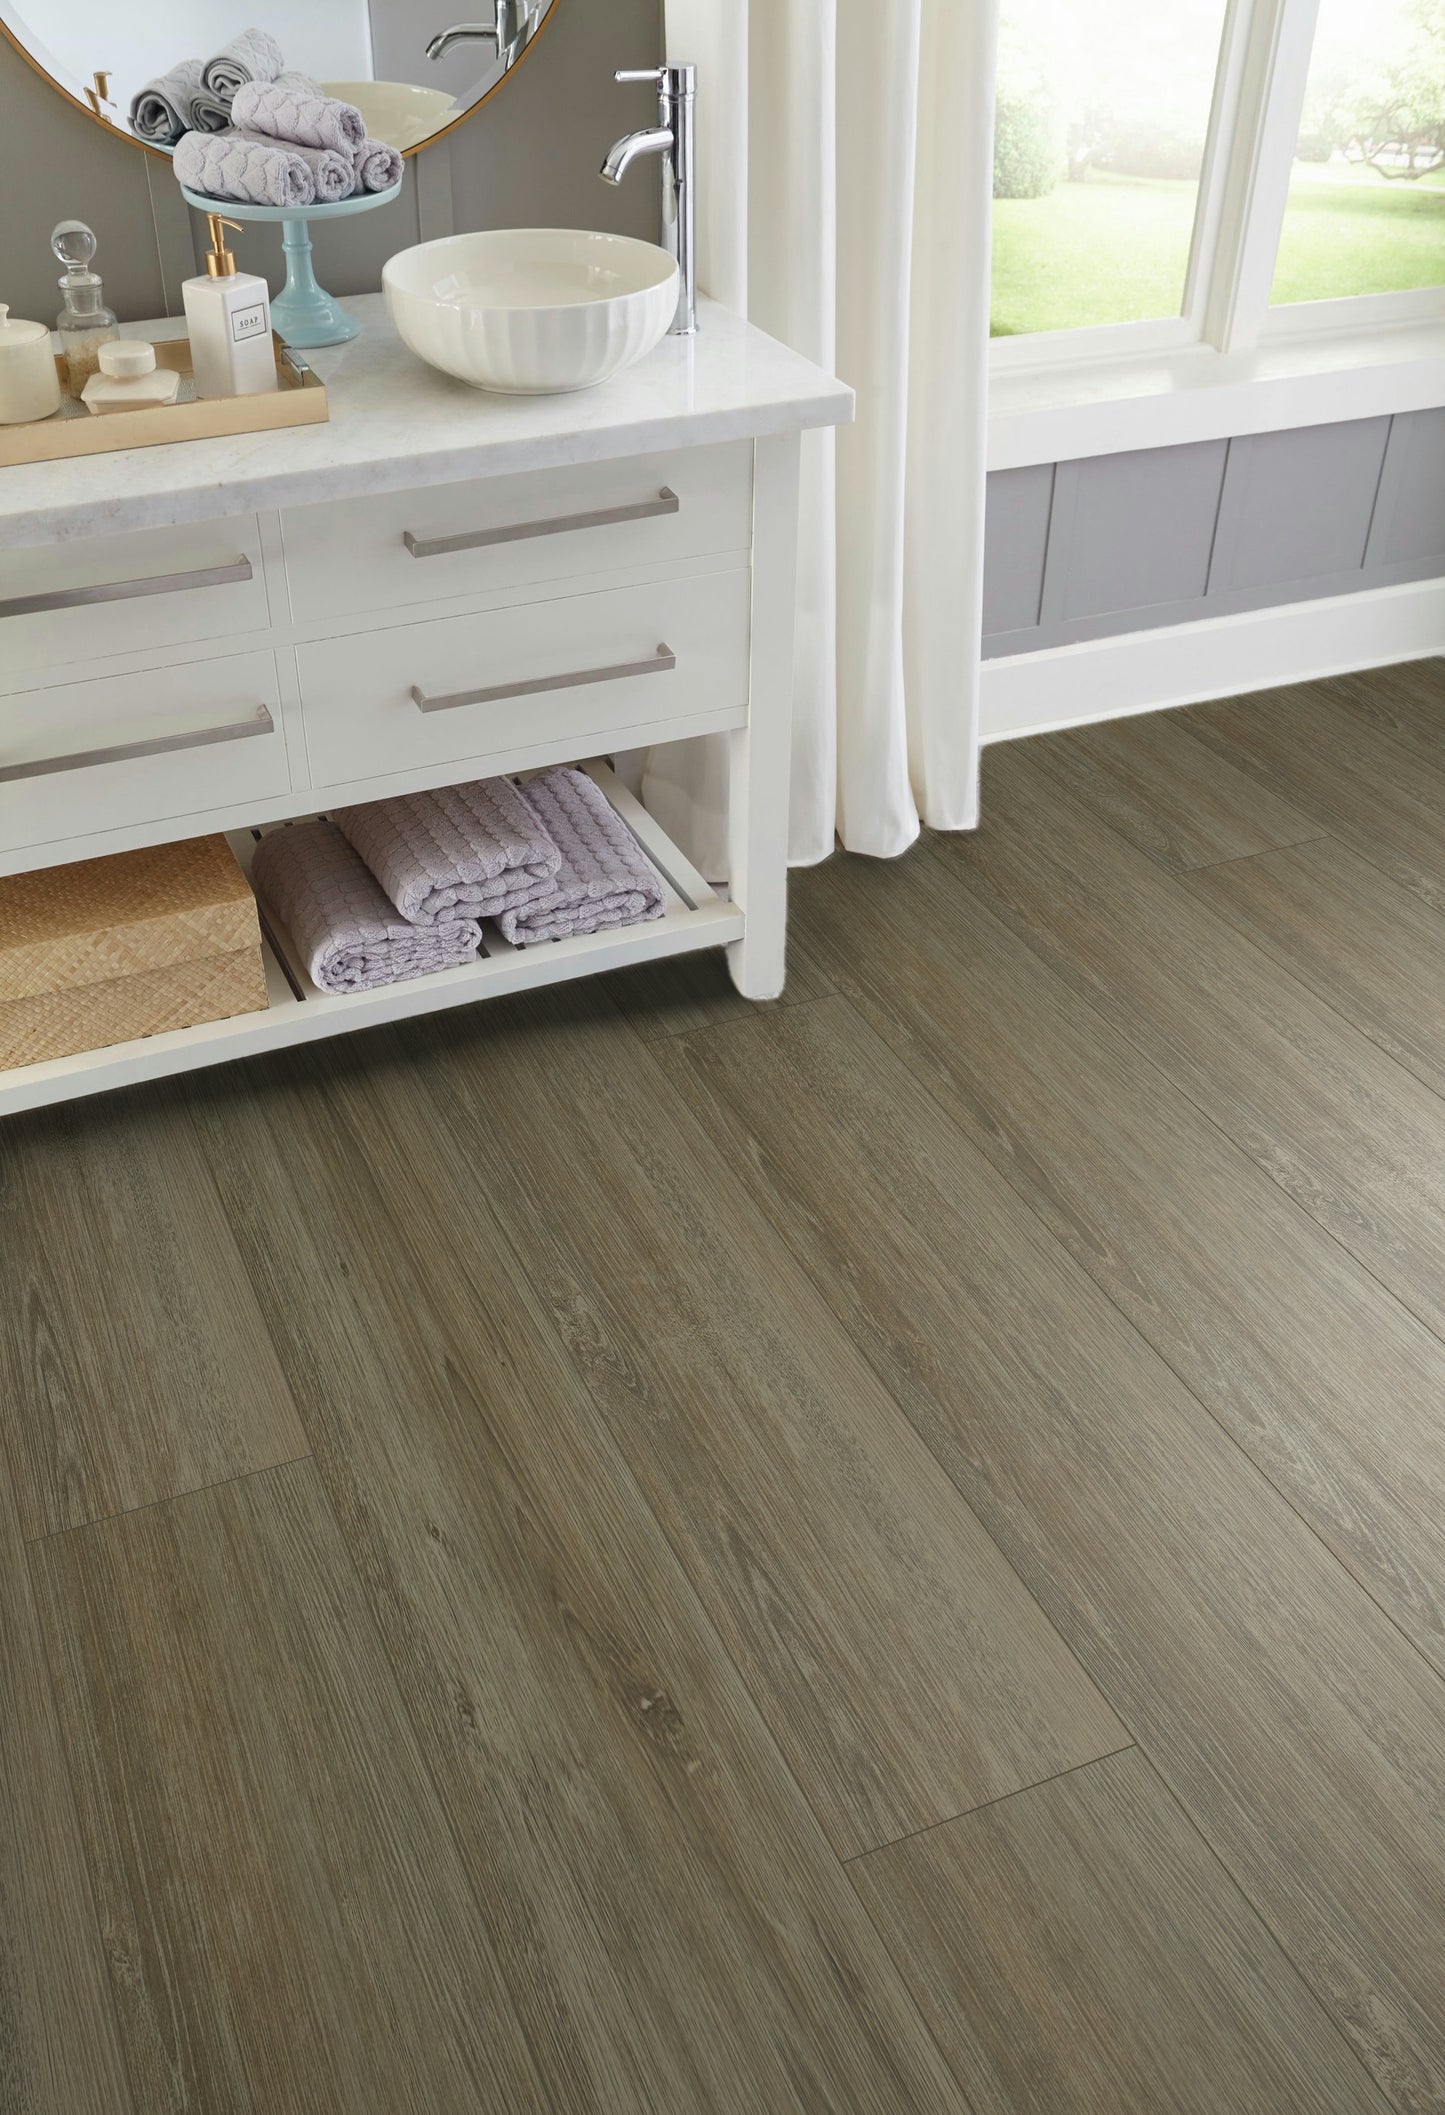 5mm Thick Rigid Core Vinyl Plank Flooring 9.13 in. Width x 60 in. Length (32.81 sq. ft. per box) - Lake House